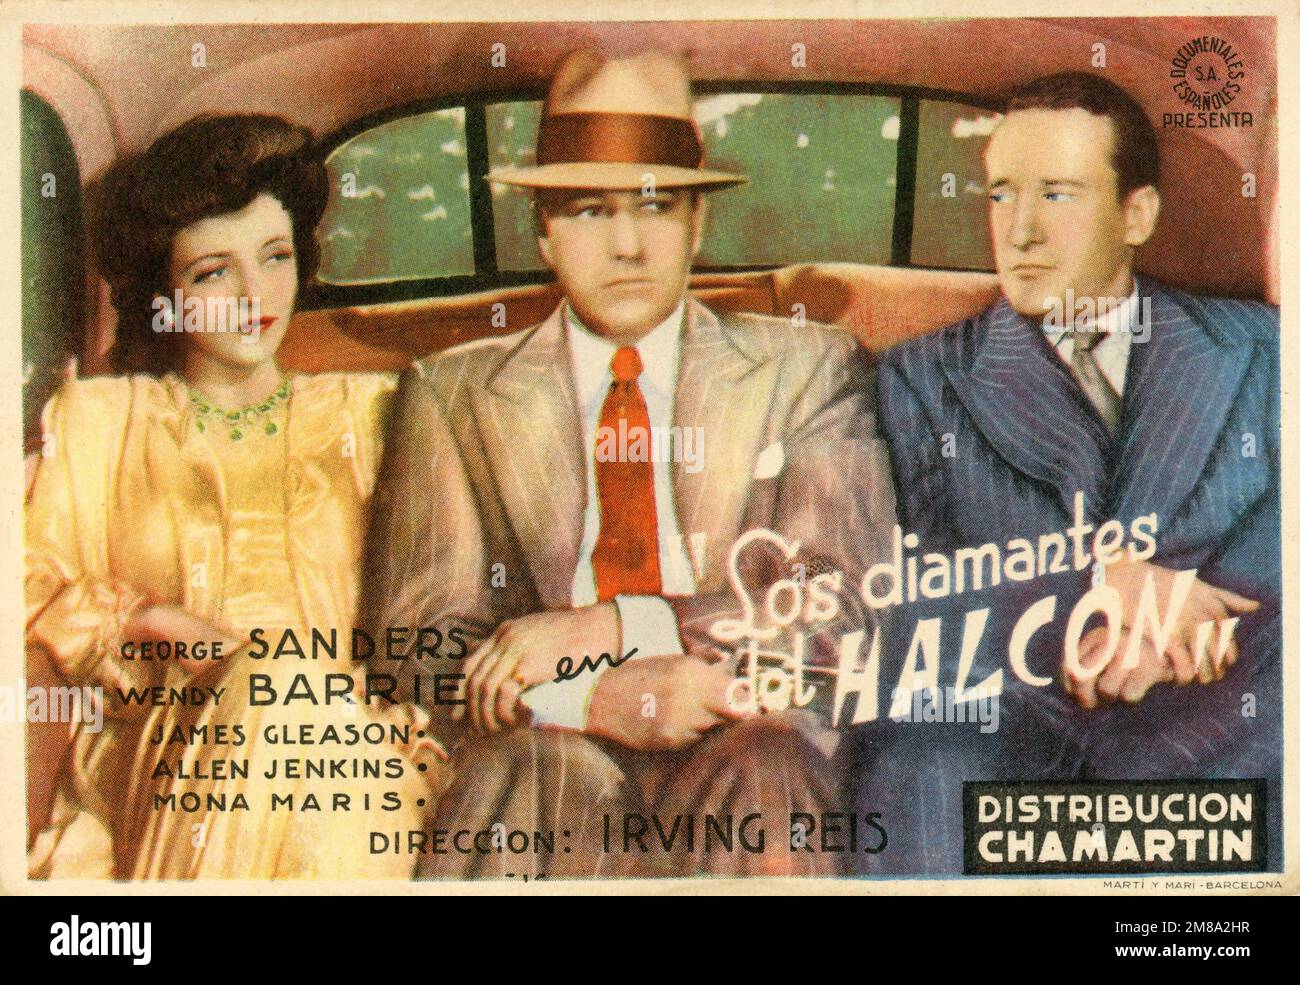 MONA MARIS RUSS CLARK and GEORGE SANDERS in A DATE WITH THE FALCON 1942 director IRVING REIS based on the character created by Michael Arlen RKO Radio Pictures Stock Photo